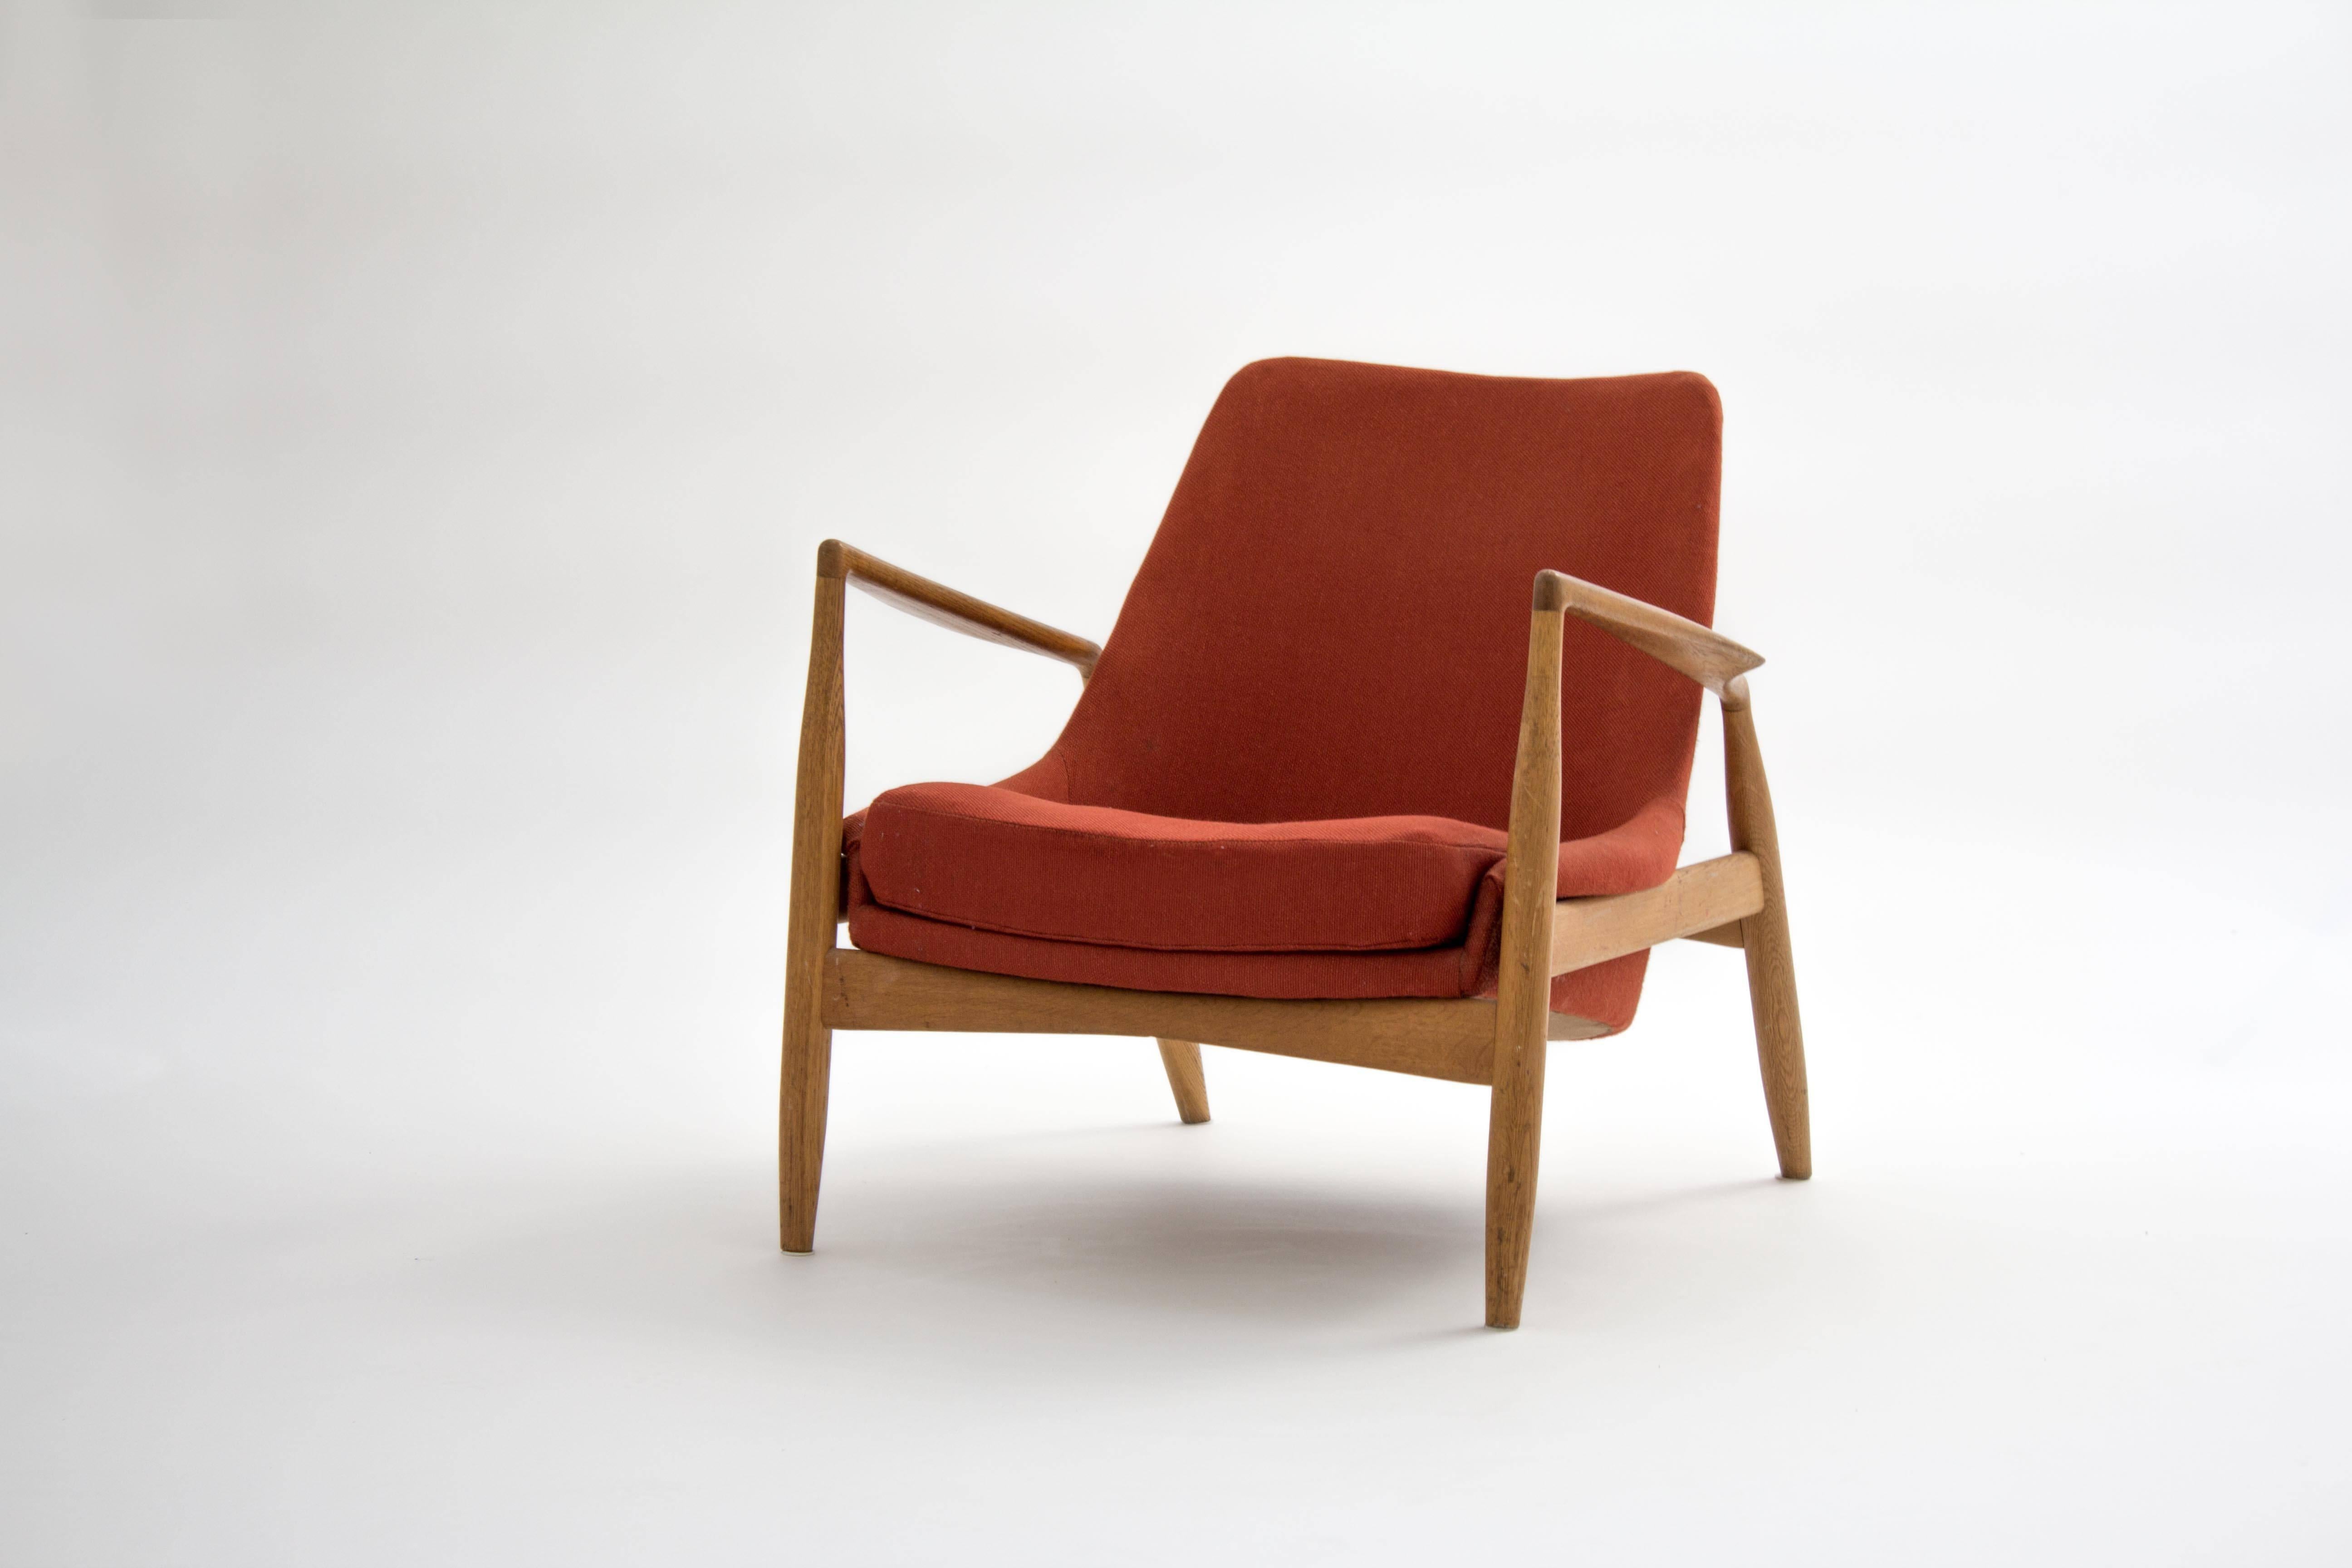 Early version of the Sälen (seal) lounge chair by Ib Kofod-Larsen in birch with original fabric for OPE, 1956

In 1956, the Danish furniture architect Ib Kofod-Larsen received an assignment from the Swedish furniture maker OPE Möbler (Olof Persons